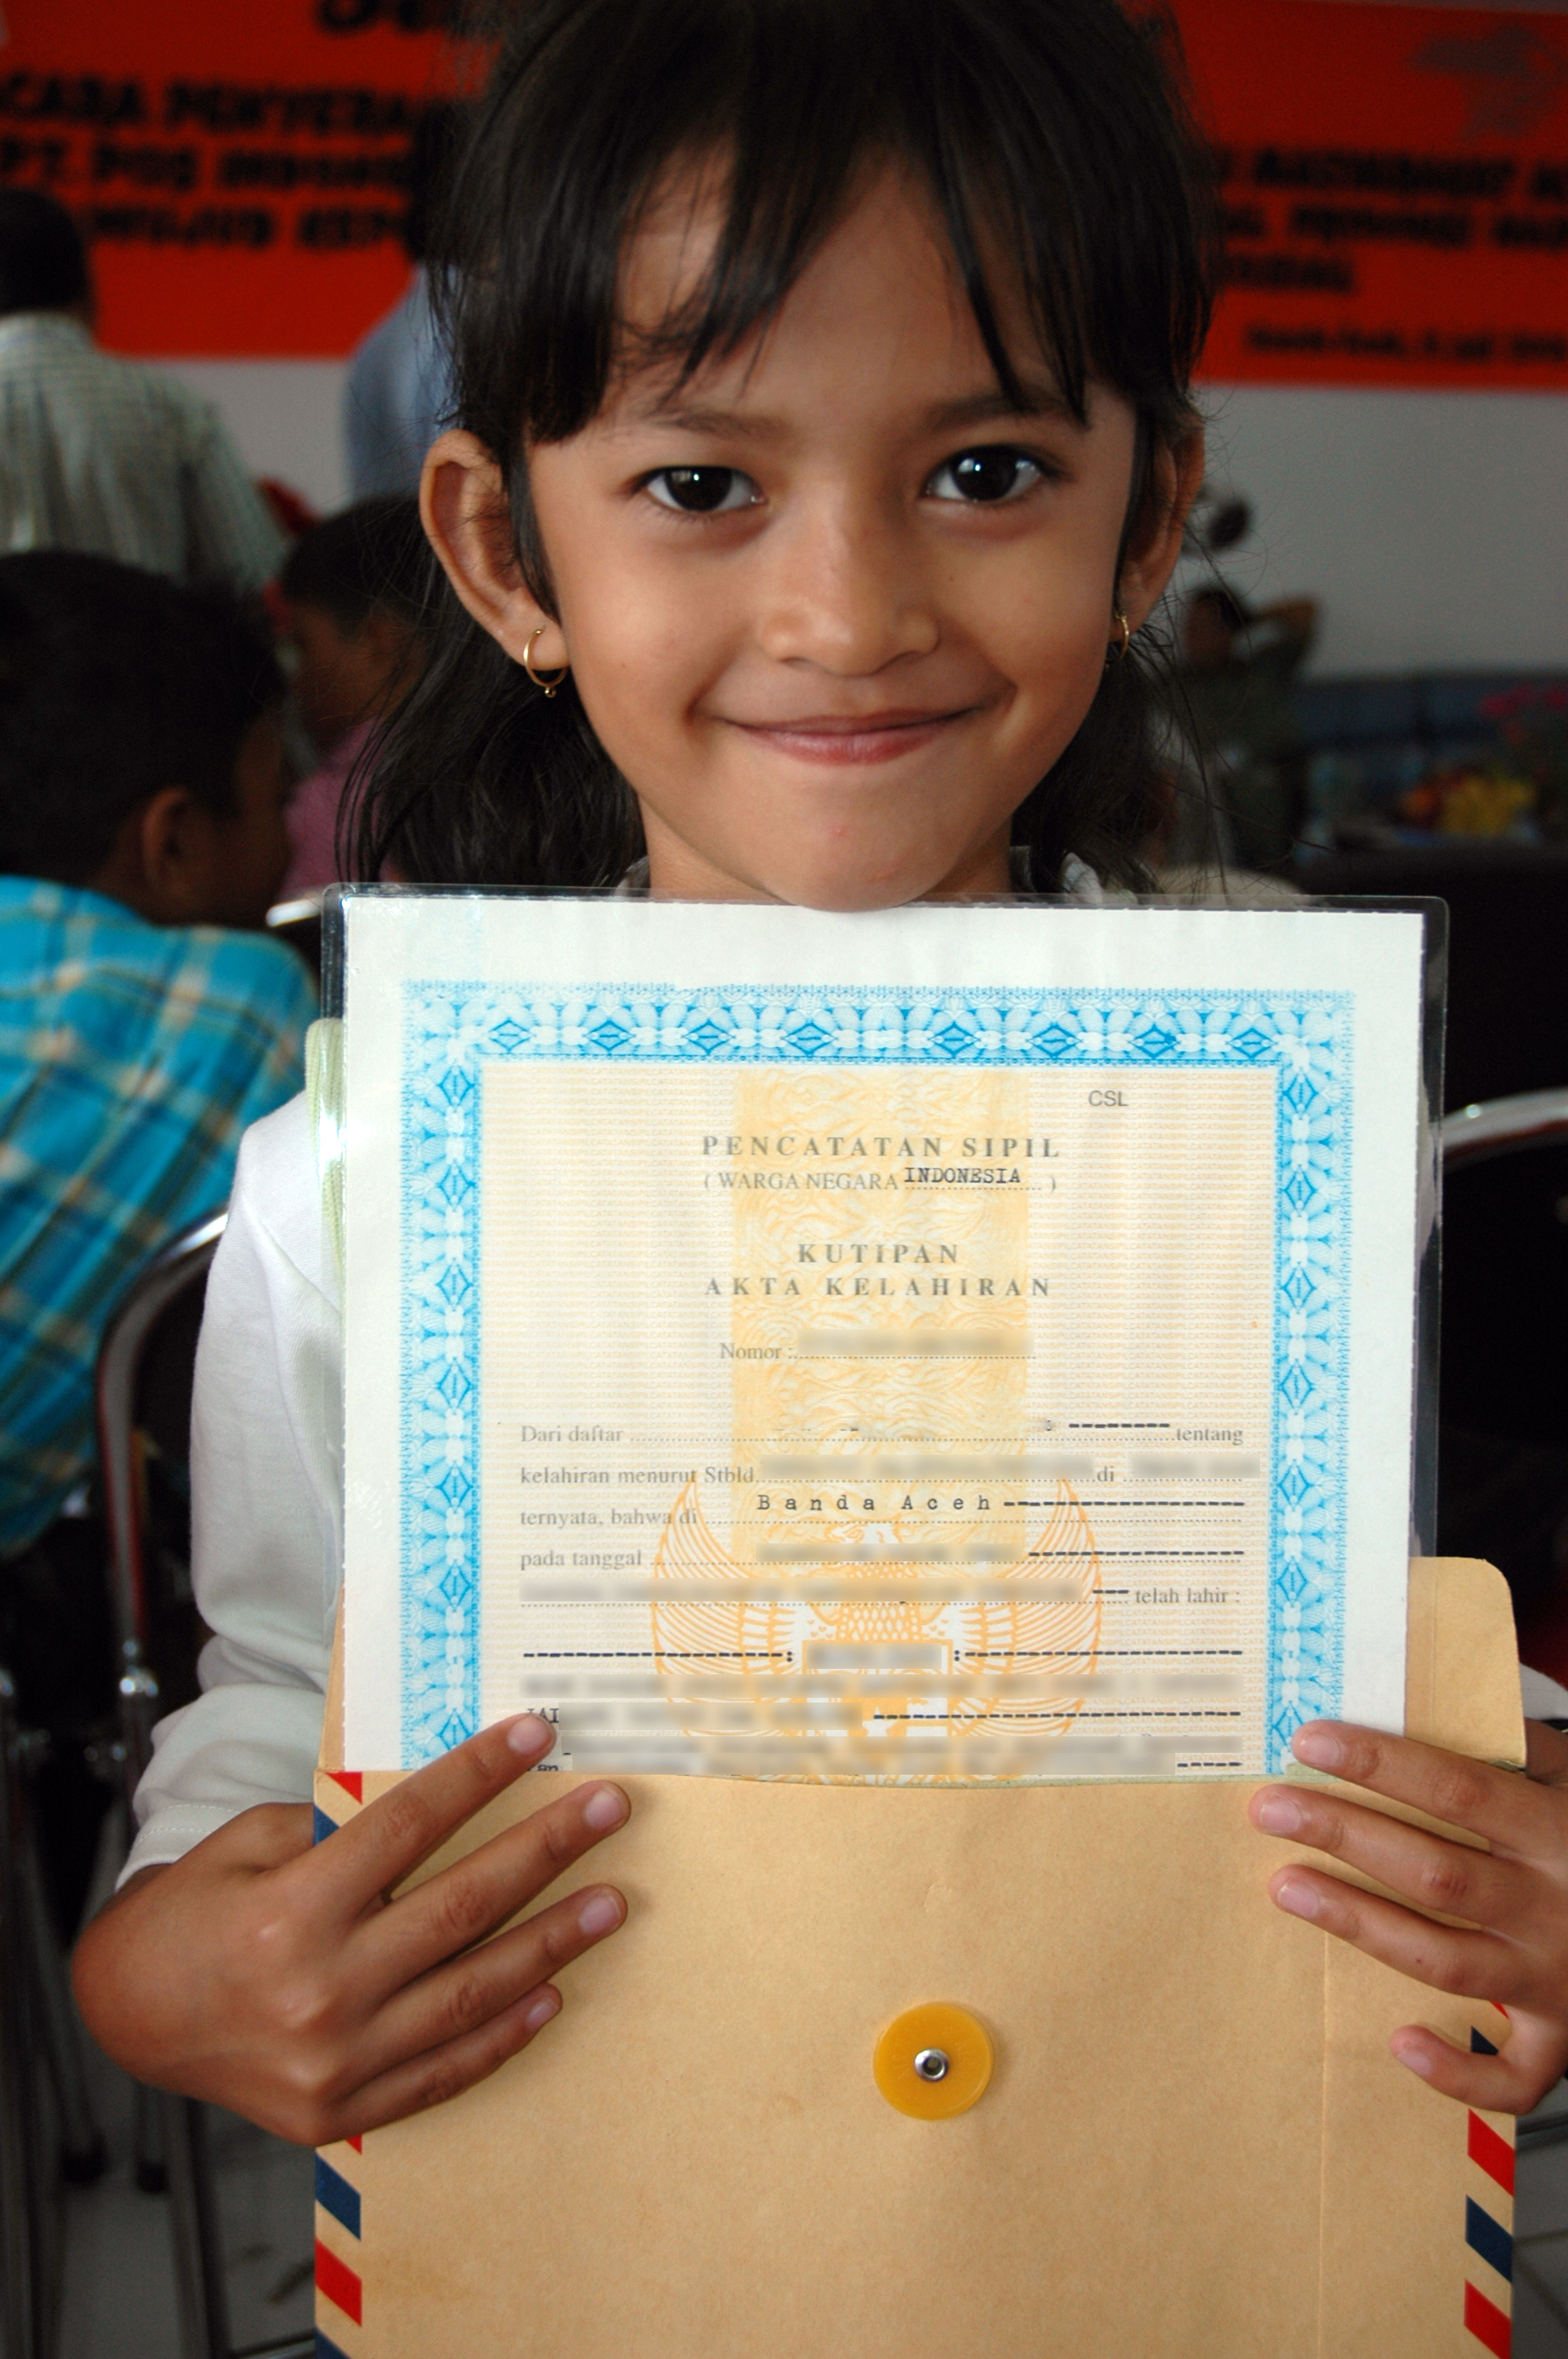 New Birth Certificates Mean Better Opportunities for Tsunami-Affected Children in Indonesia